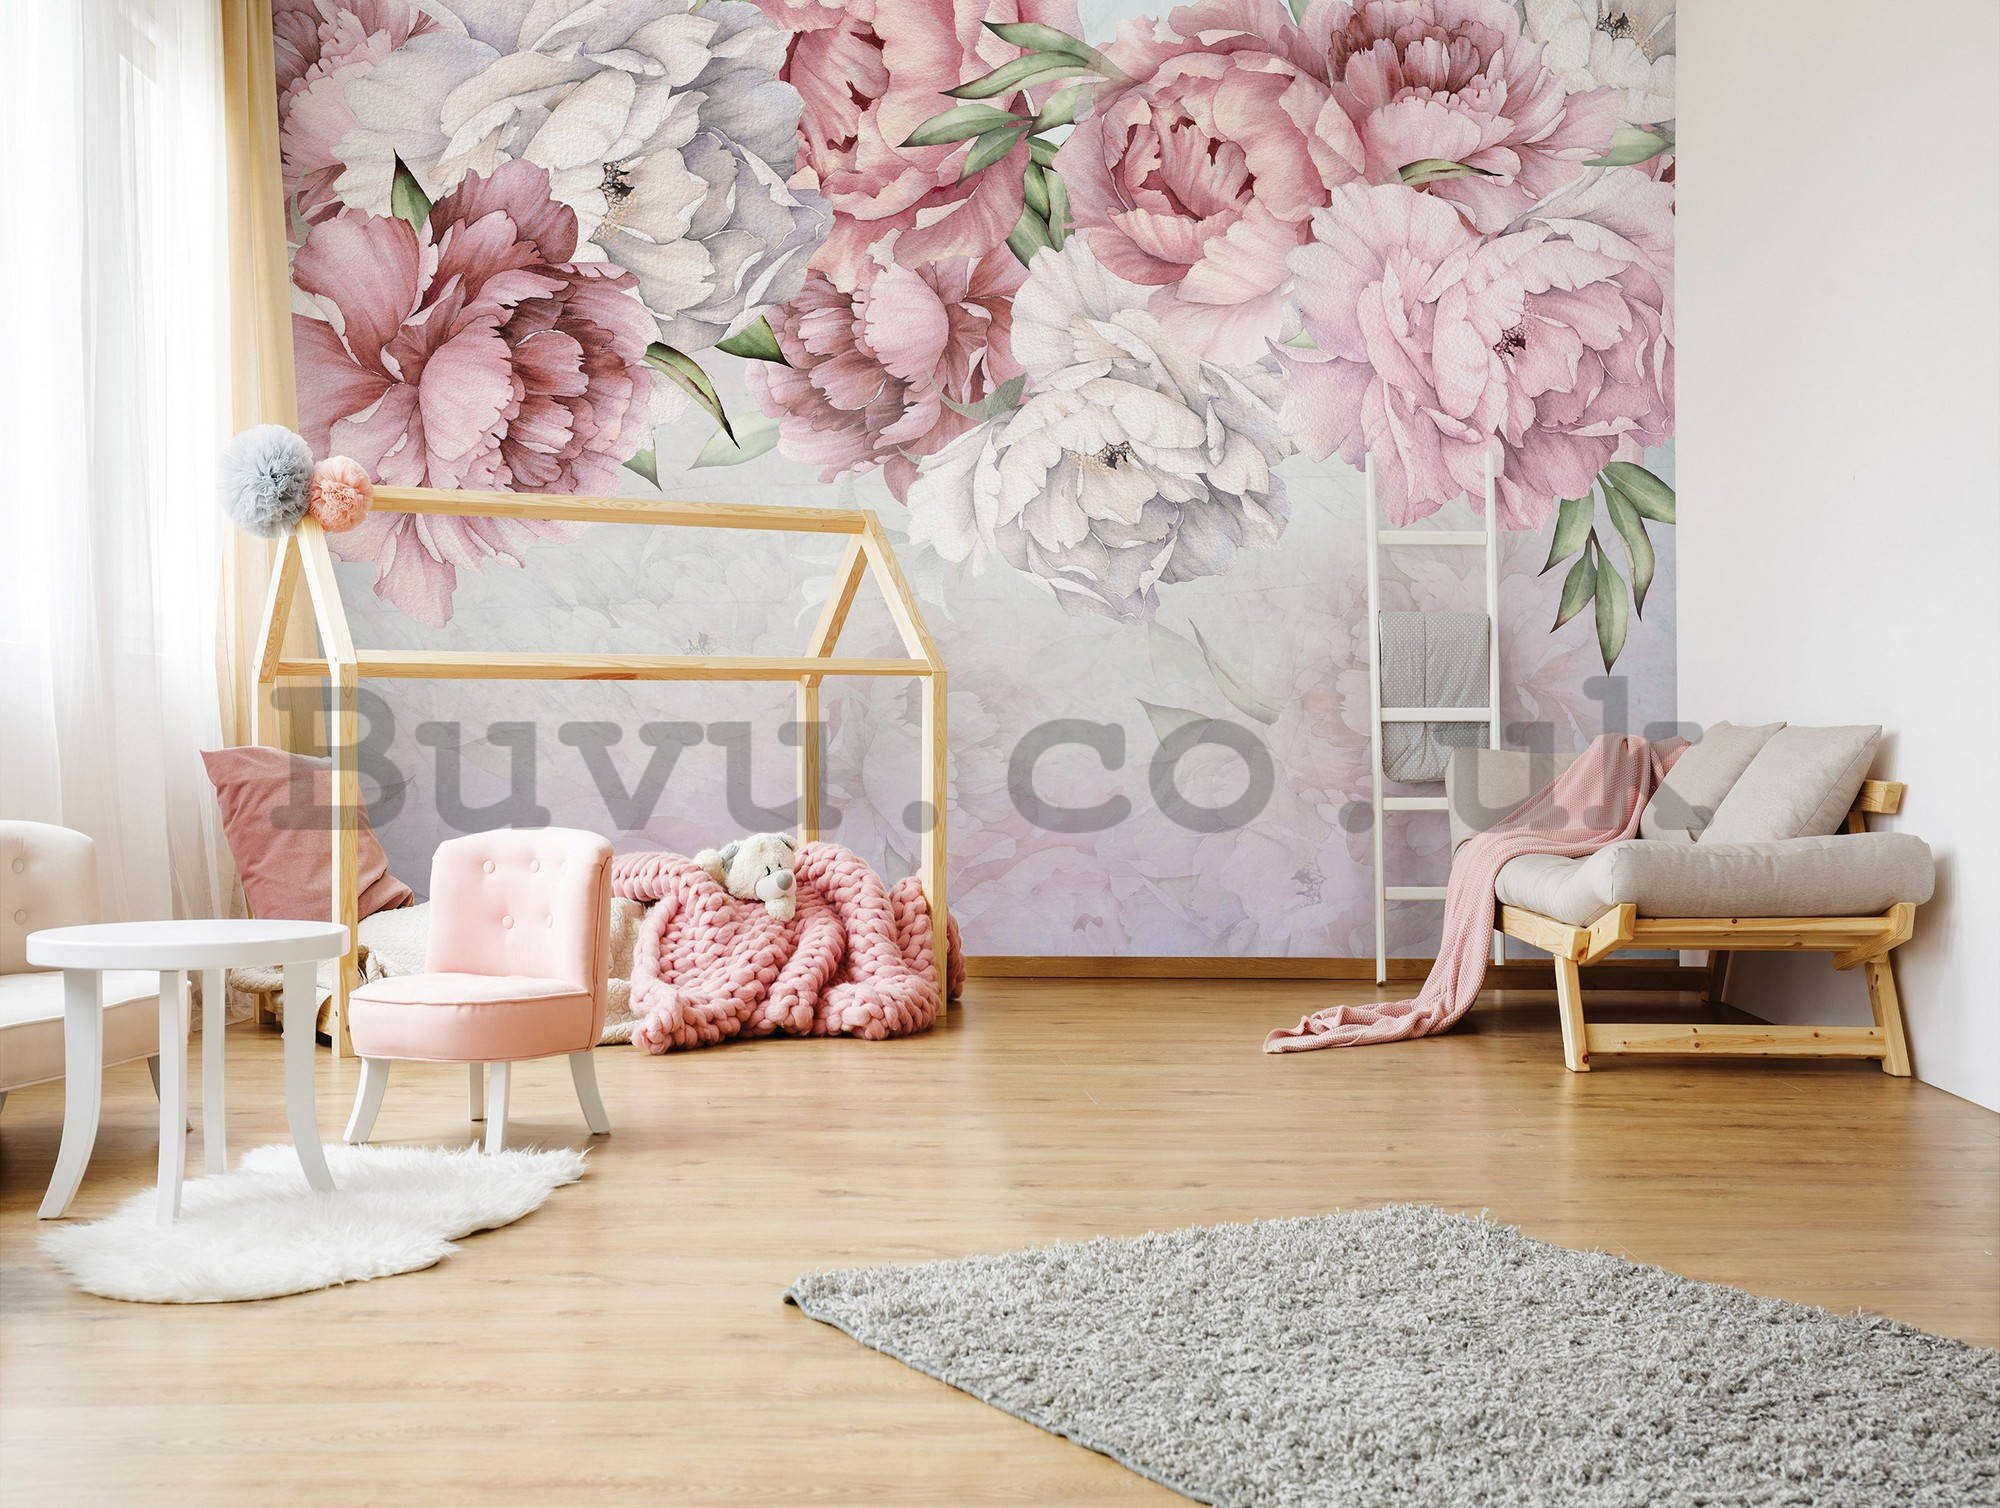 Wall mural vlies: White and pink roses - 254x184 cm